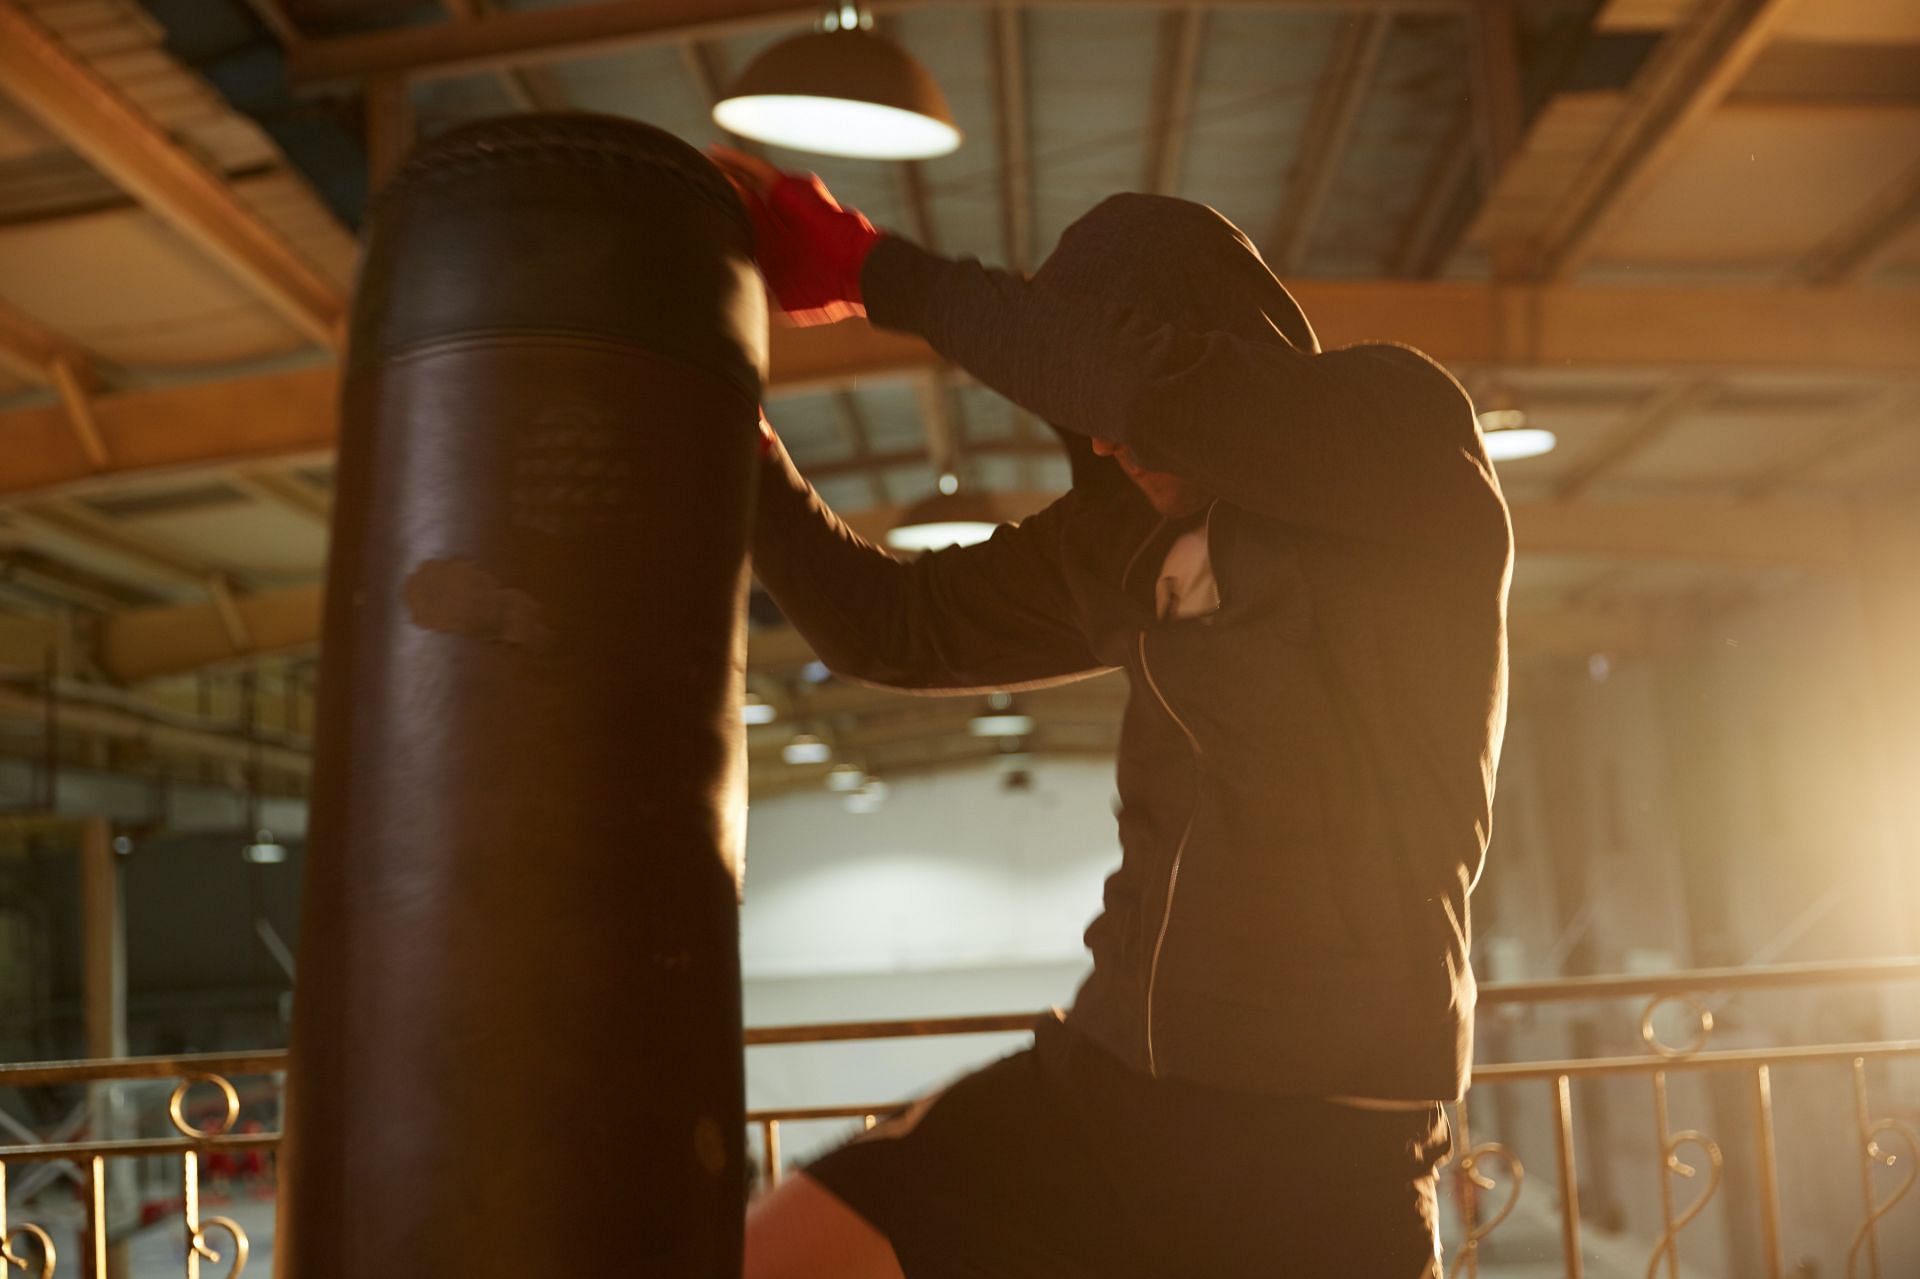 Boxing Heavy Bag Workout: What Is It, and Why Is It So Important?